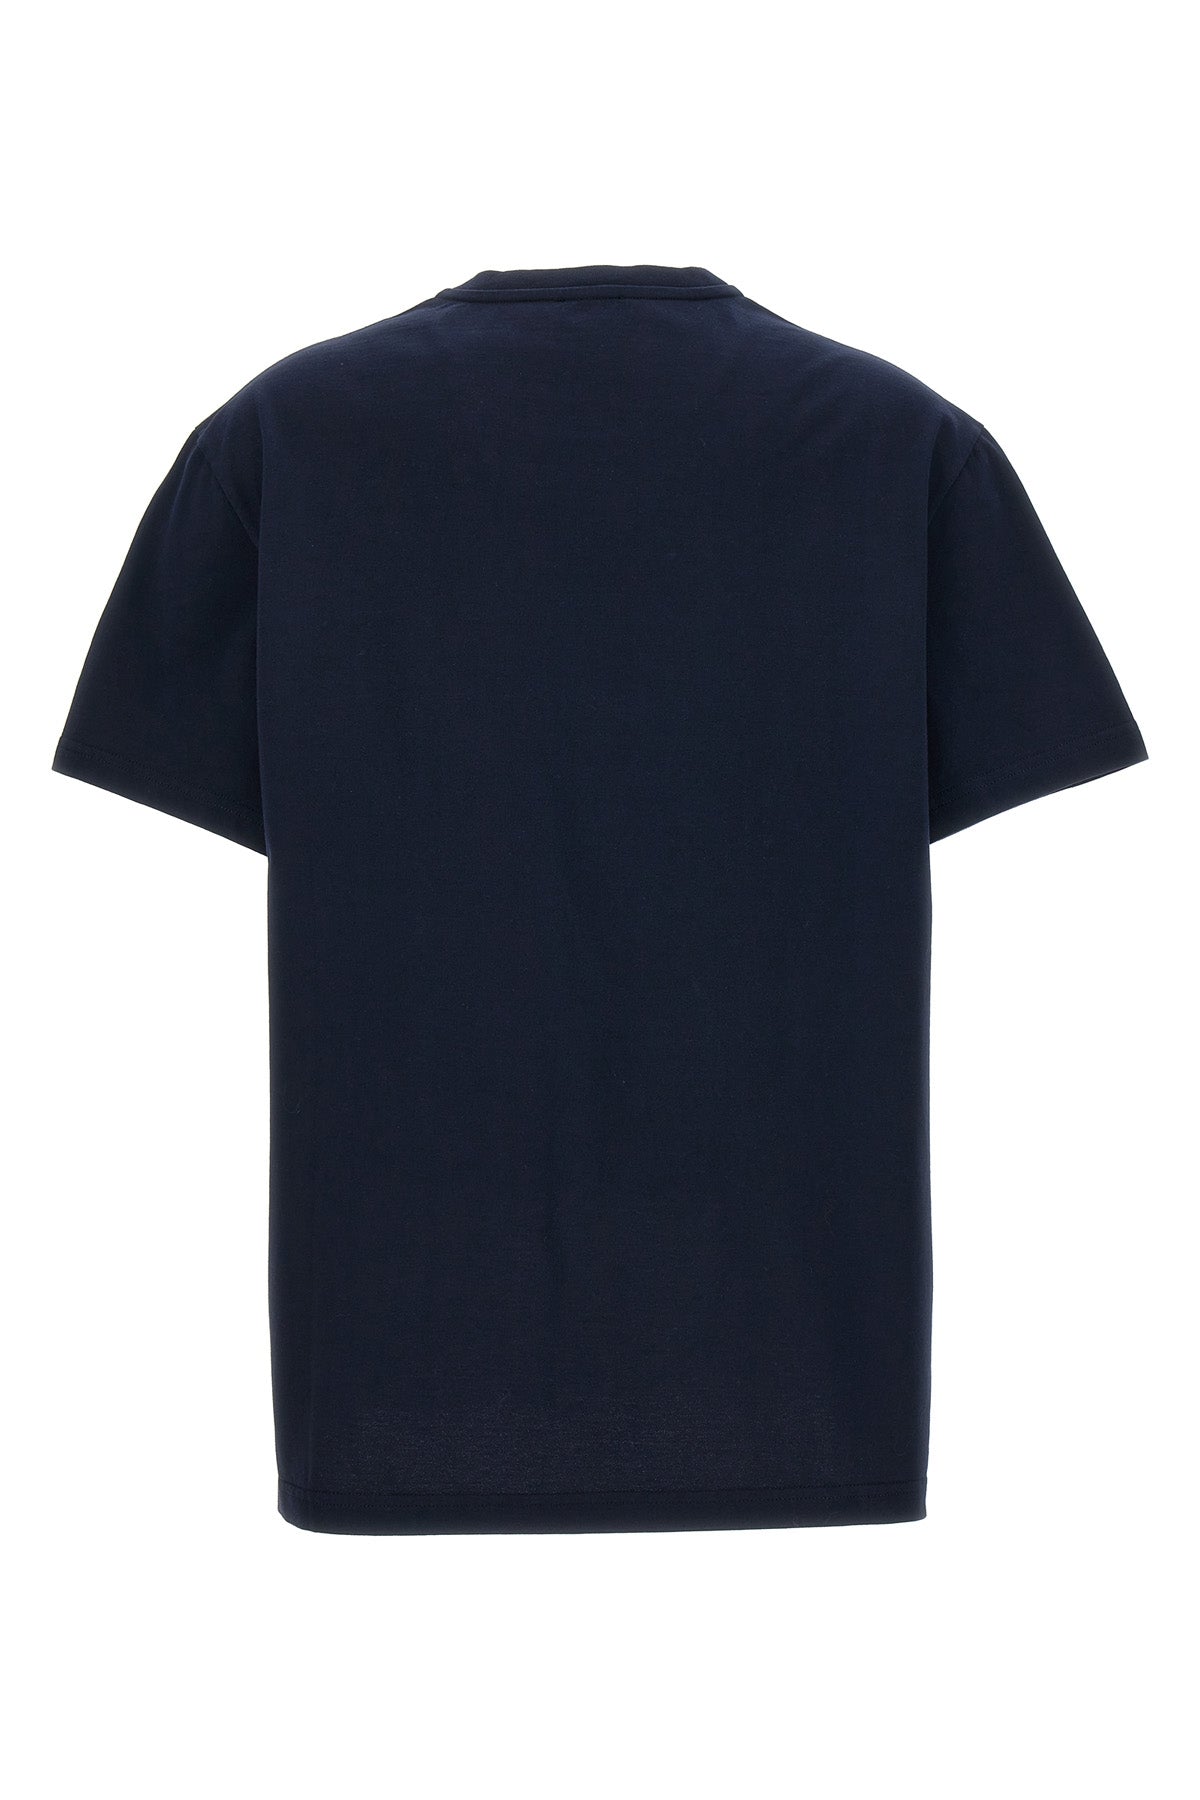 ETRO EMBROIDERY T-SHIRT